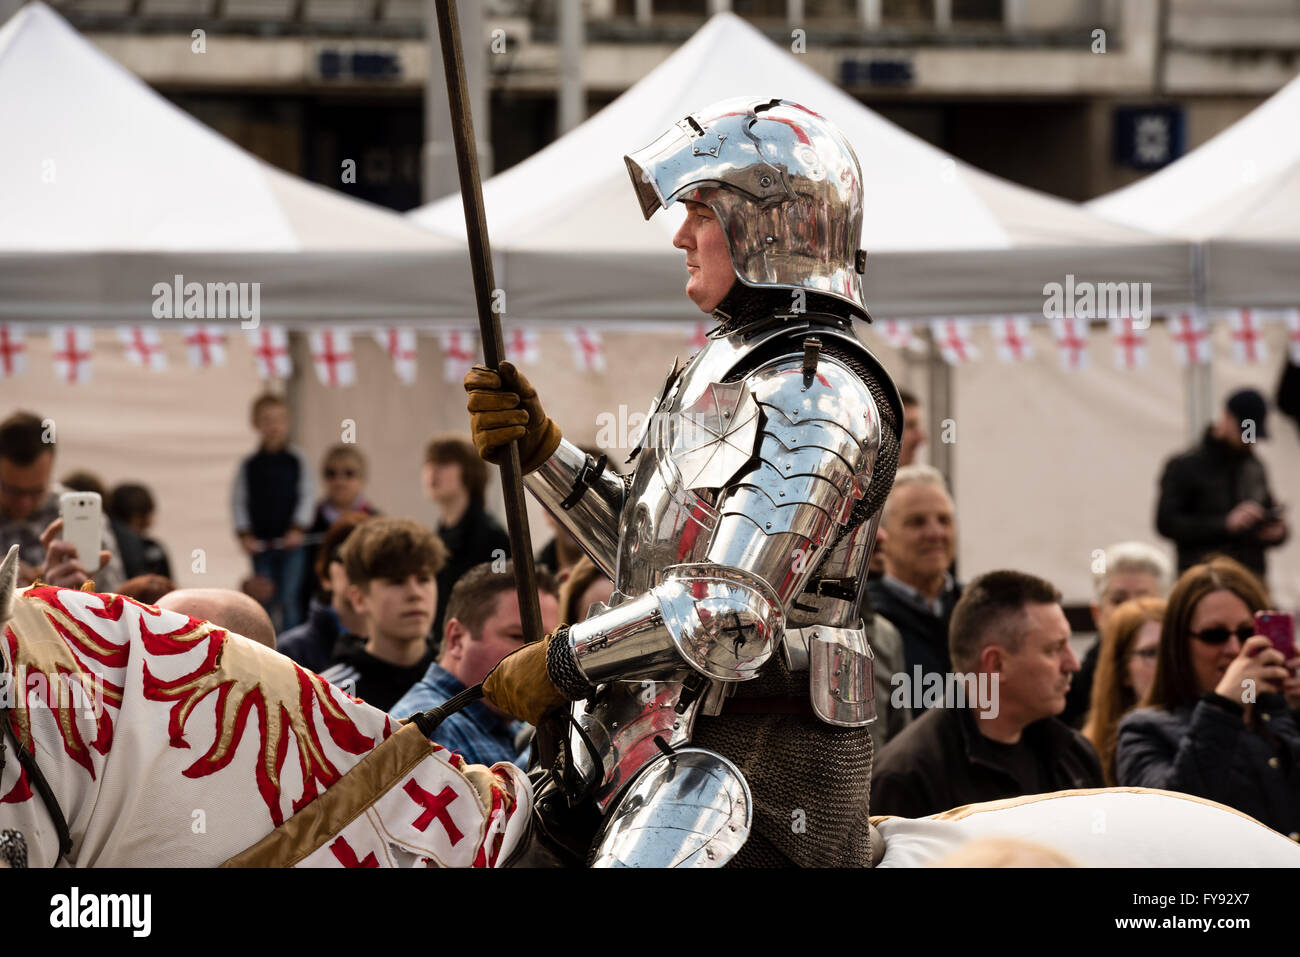 Nottingham, England UK 23 April 2016. Crowds gathered in the old Market Square. to see one of the UK's largest  St George's day parades, organised by the Royal Society of St George. St George is the patron saint of England, and the St George cross is the symbol for the country. Credit:  Mike Gibson /Alamy Live News. Stock Photo